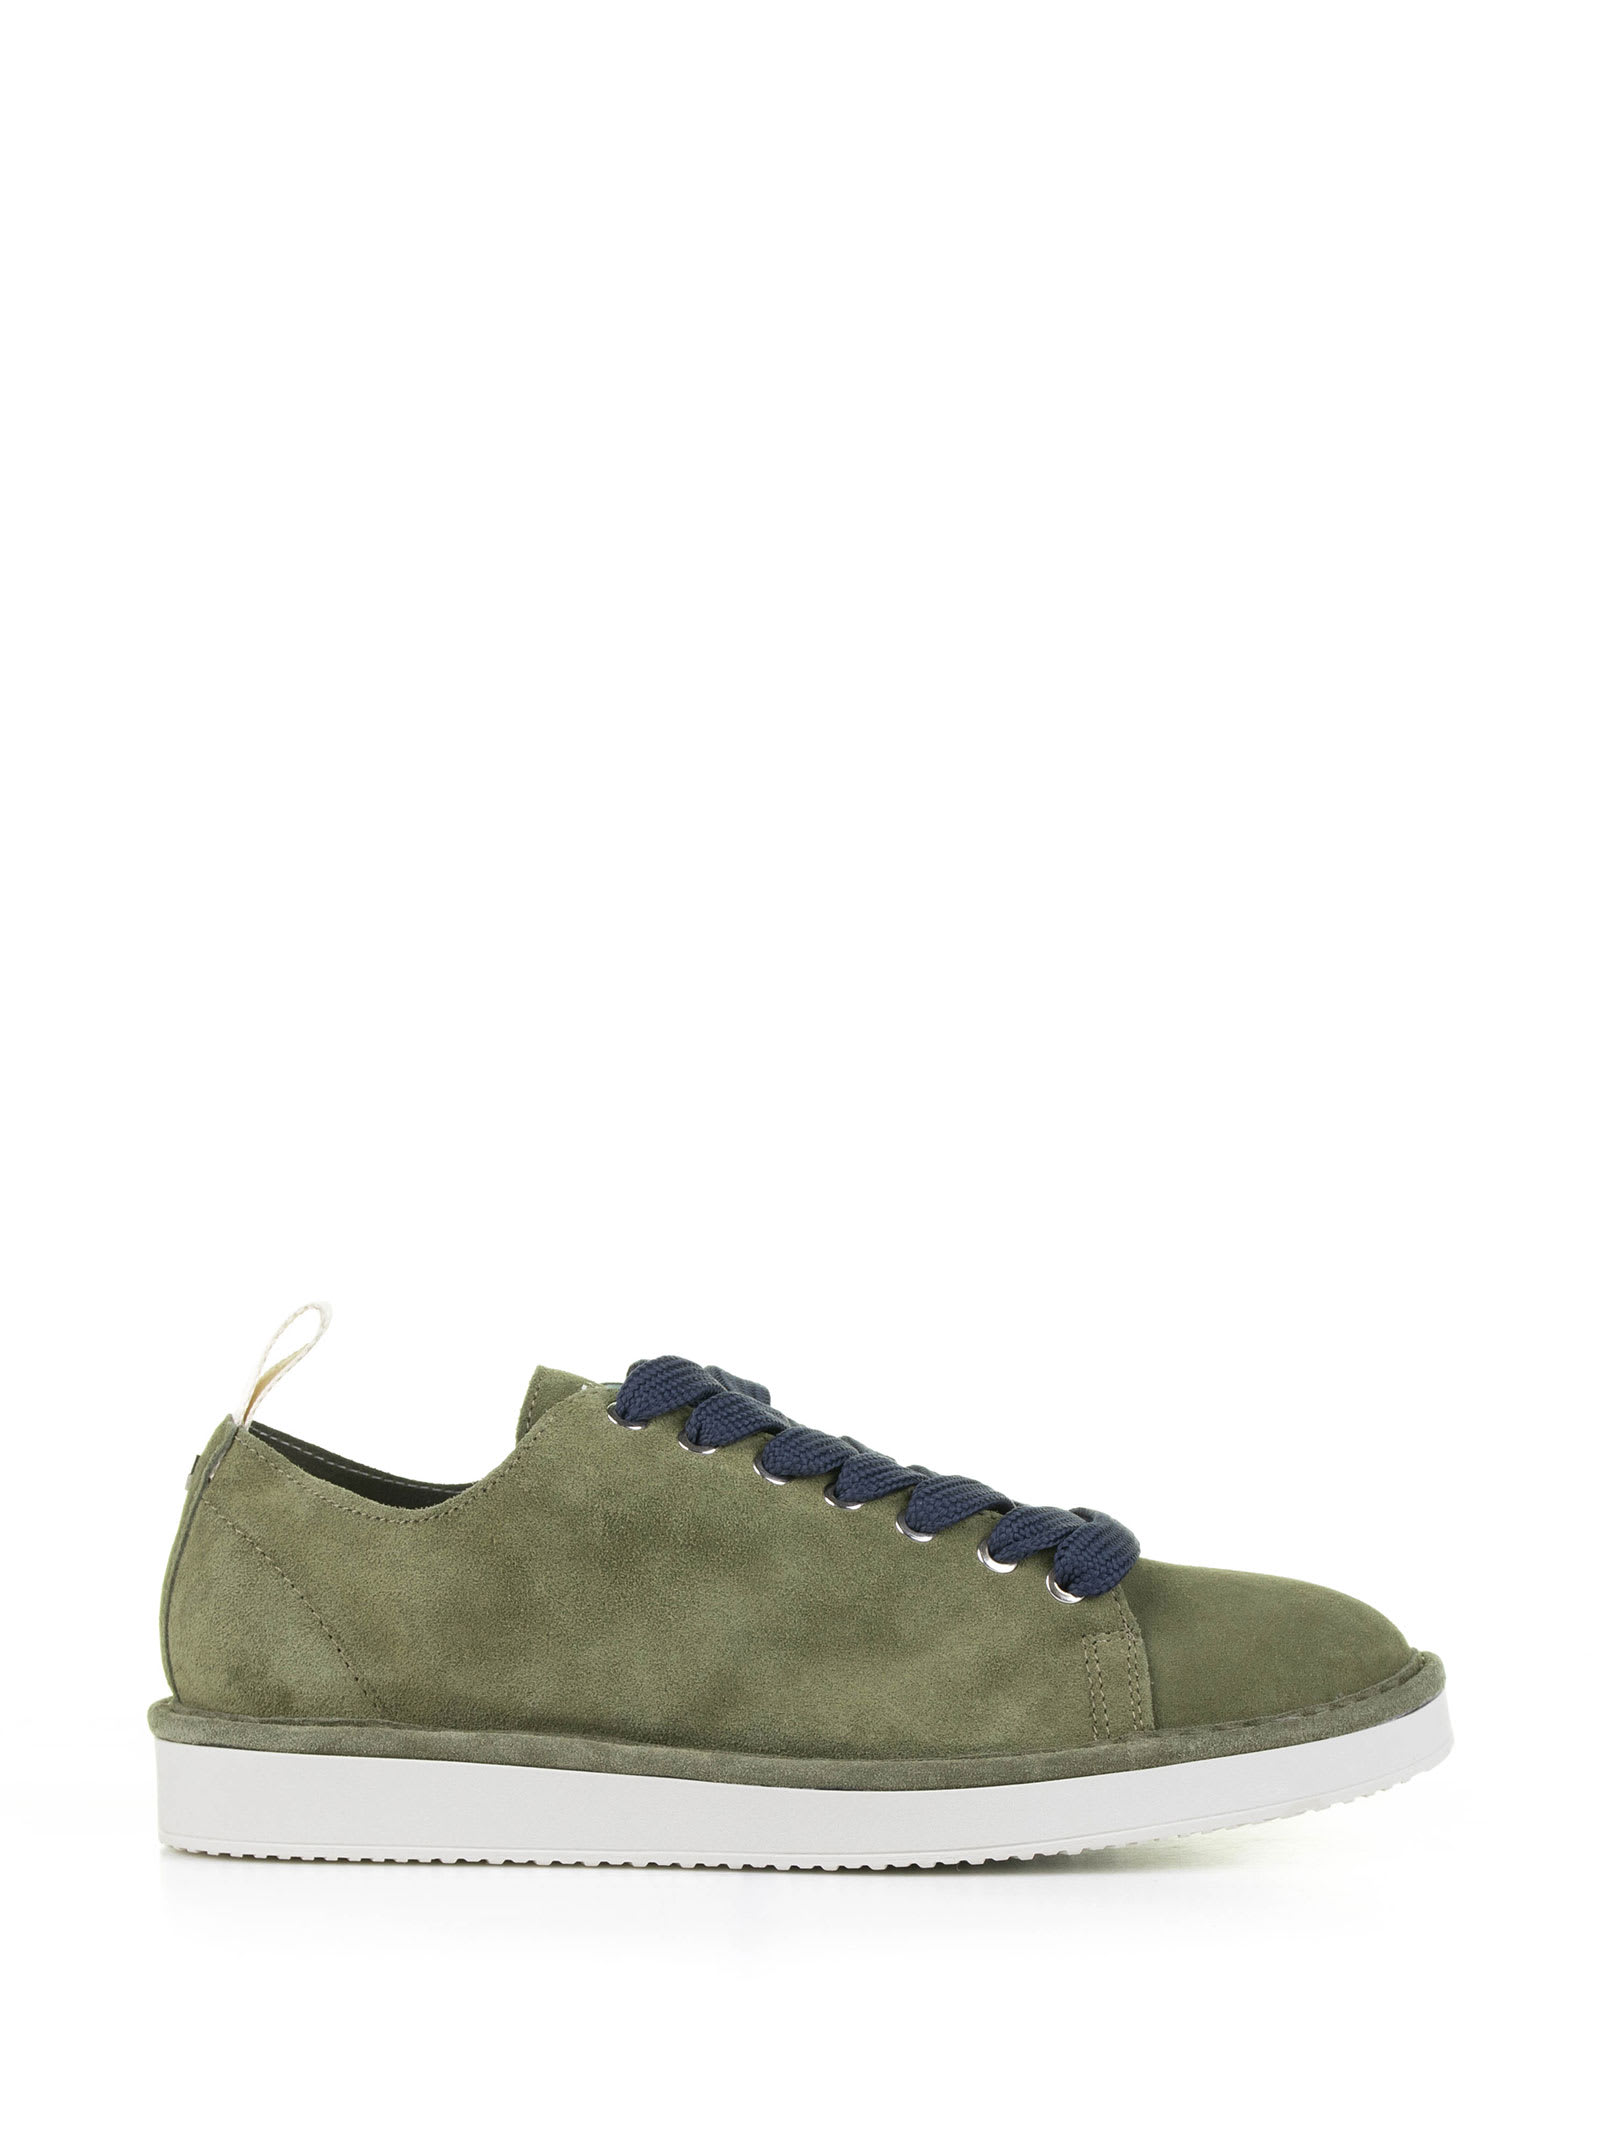 Sneaker In Military Green Suede